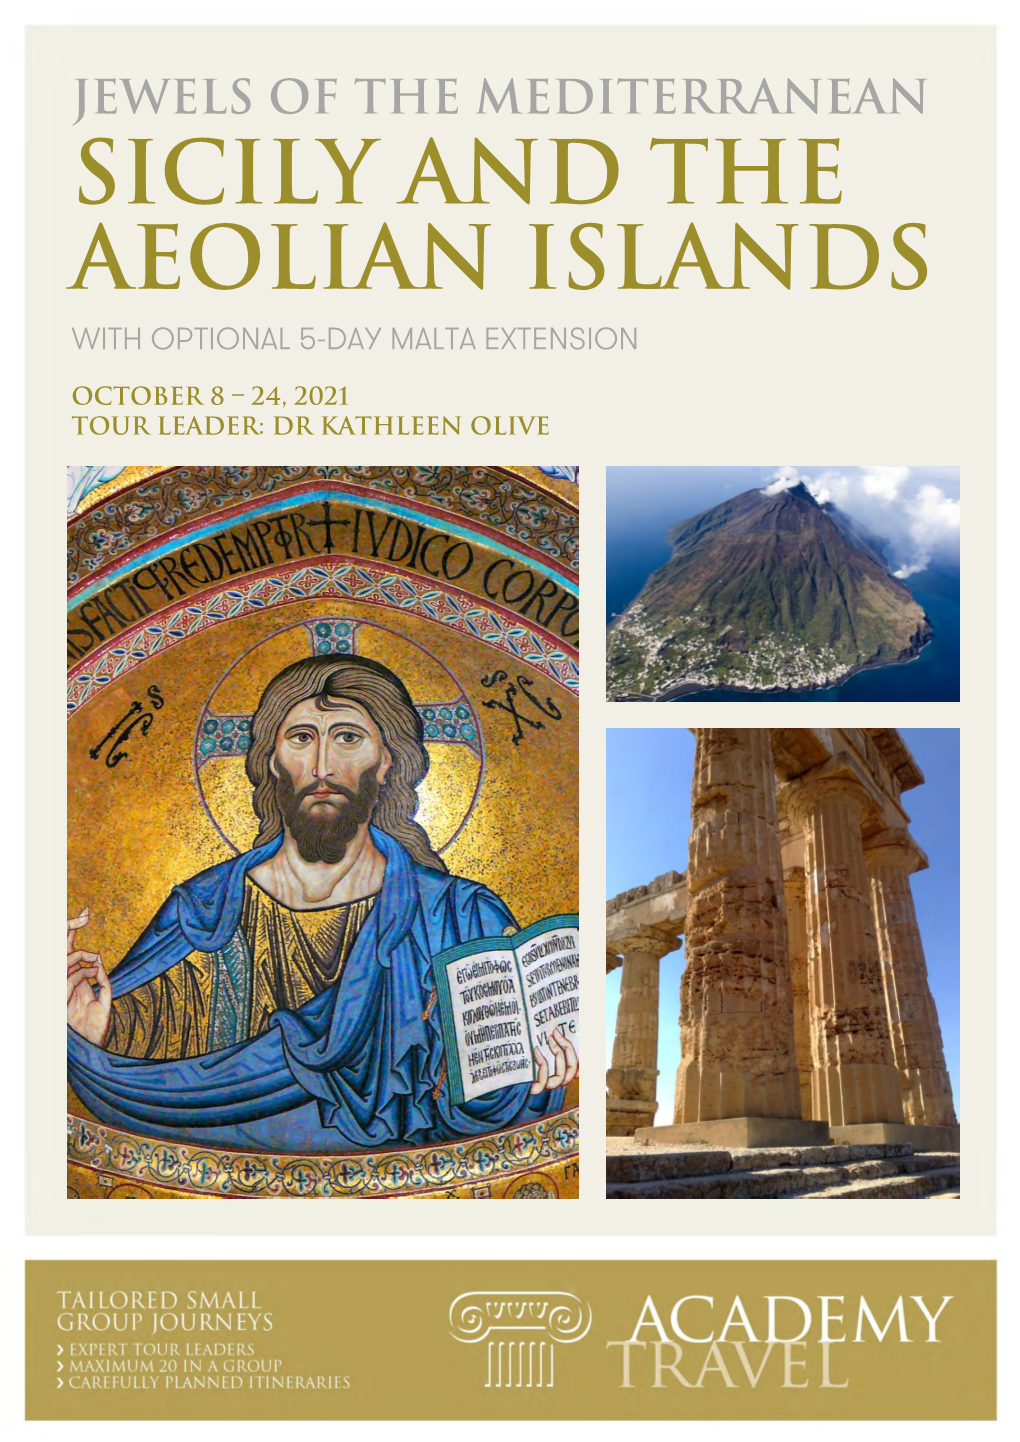 Sicily and the Aeolian Islands with Optional 5-Day Malta Extension